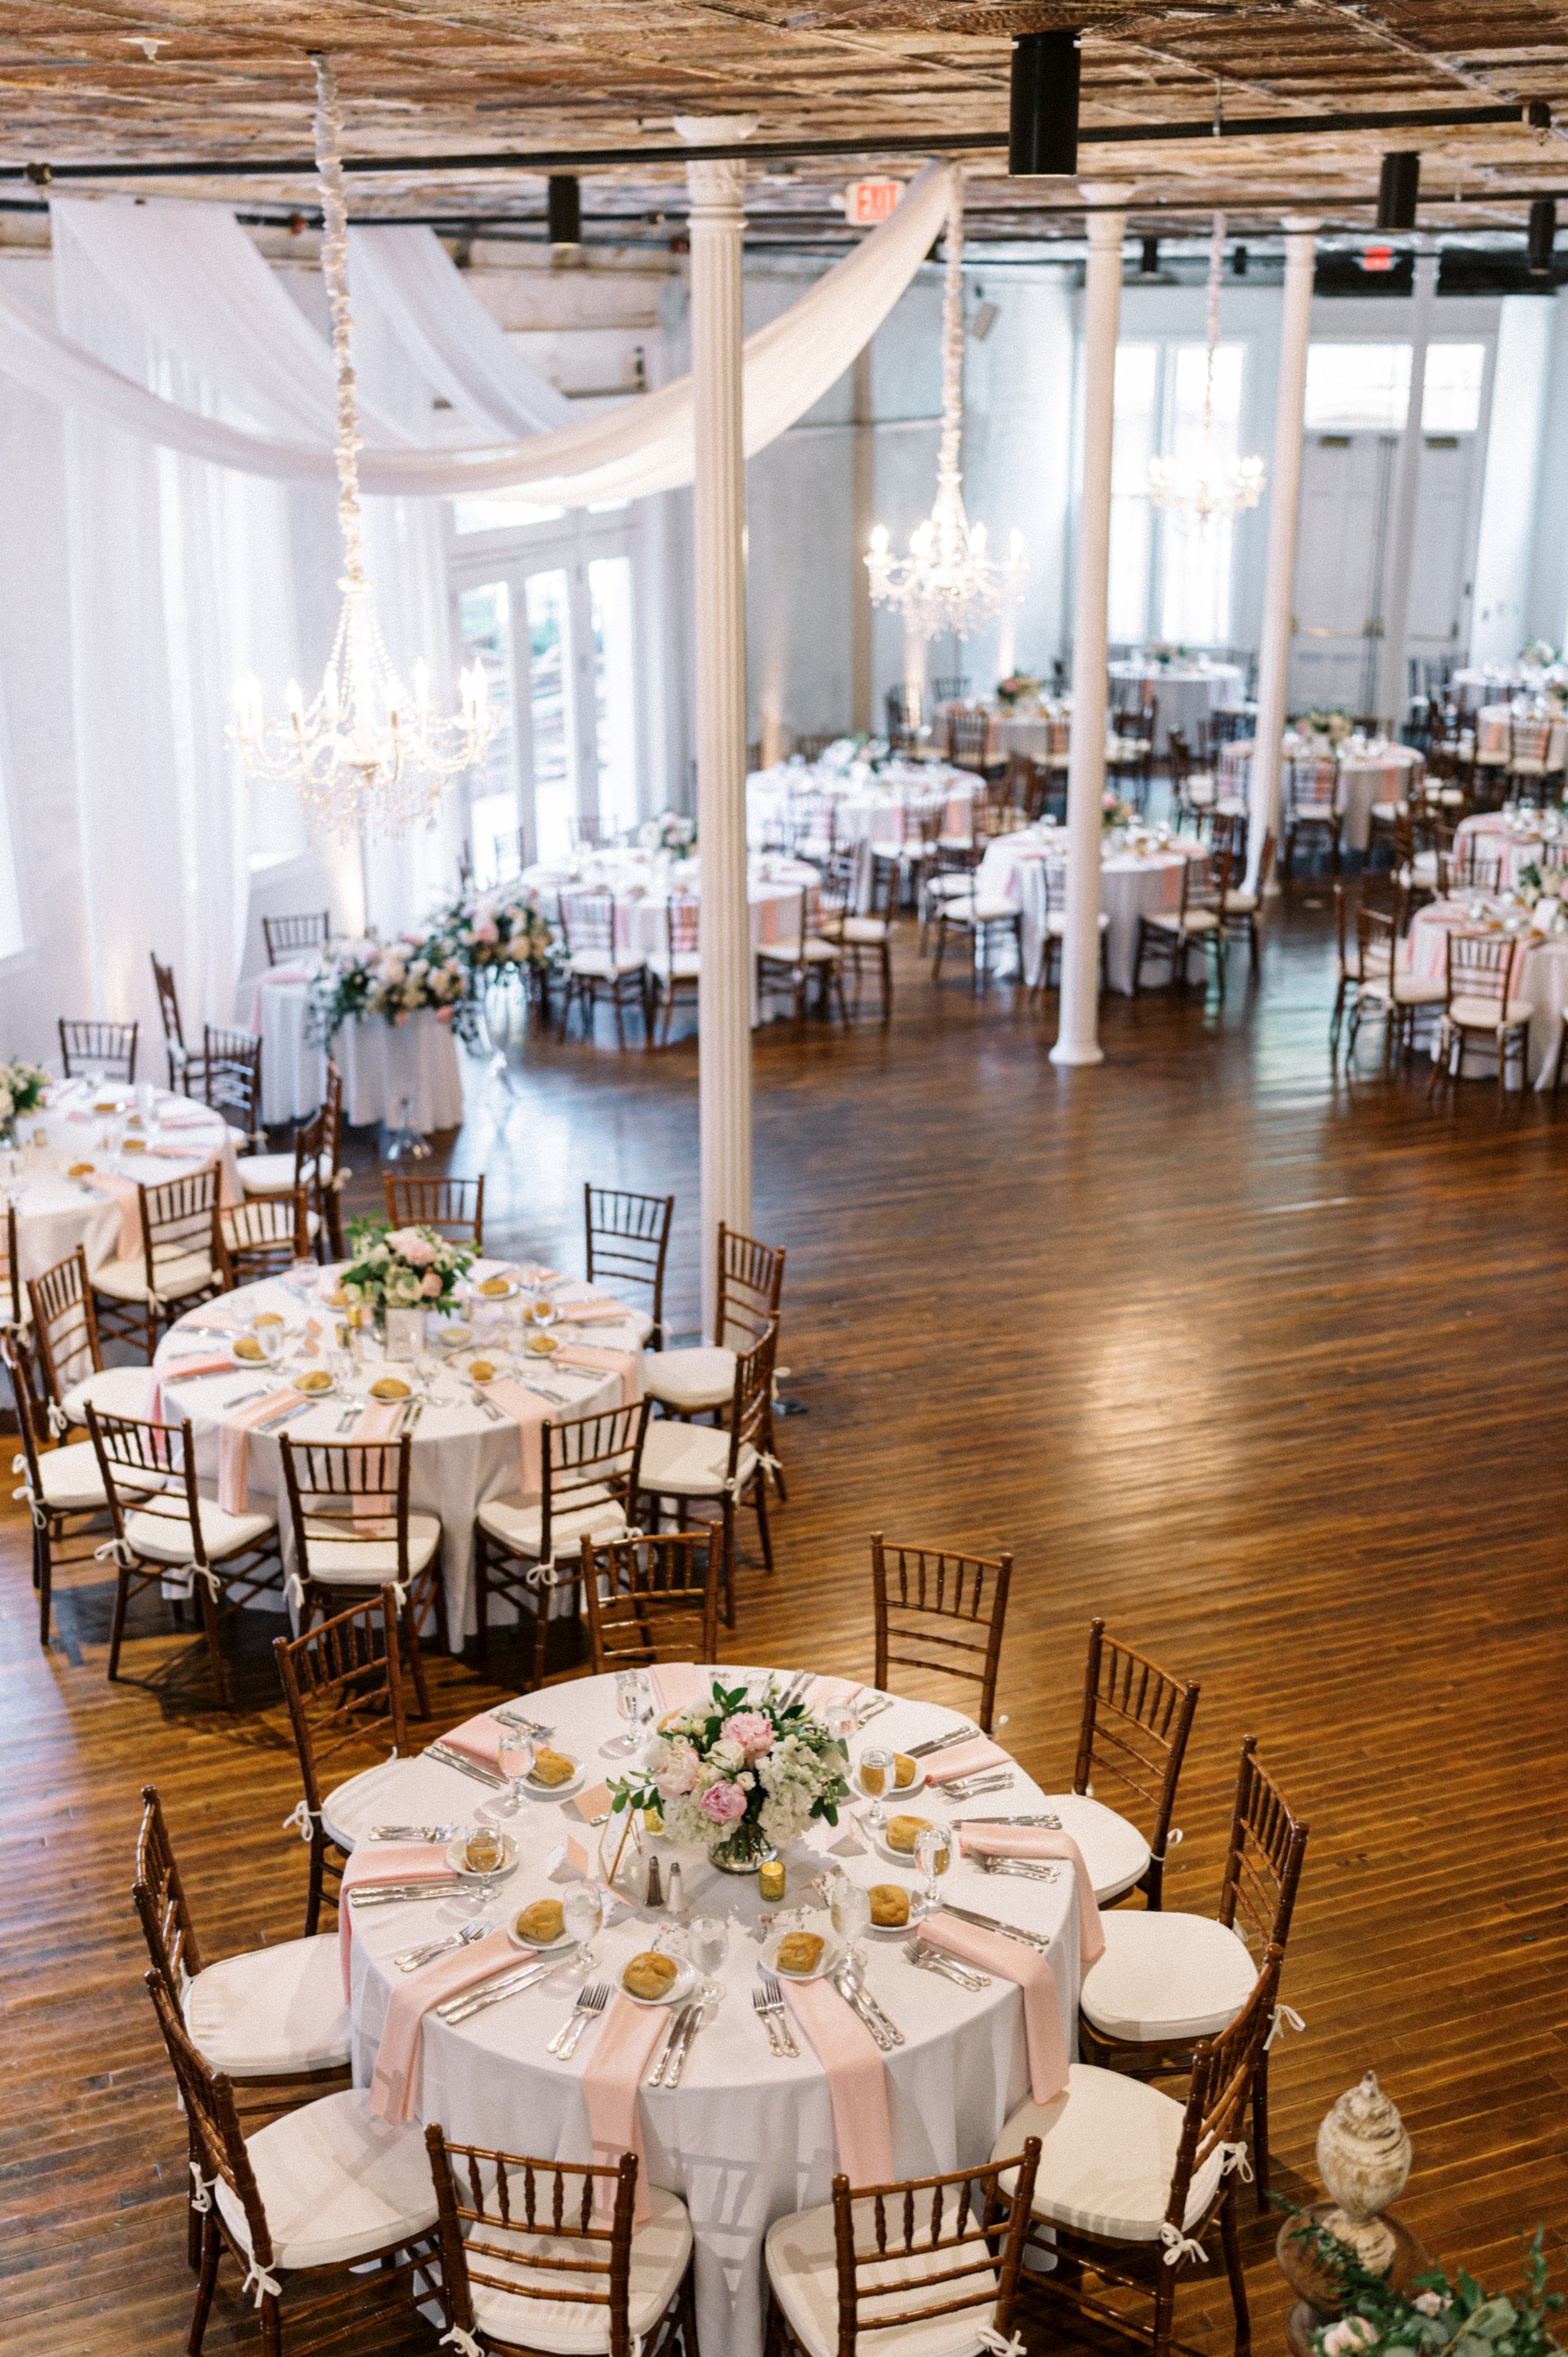 Grand Salon seated dinner table set up from above